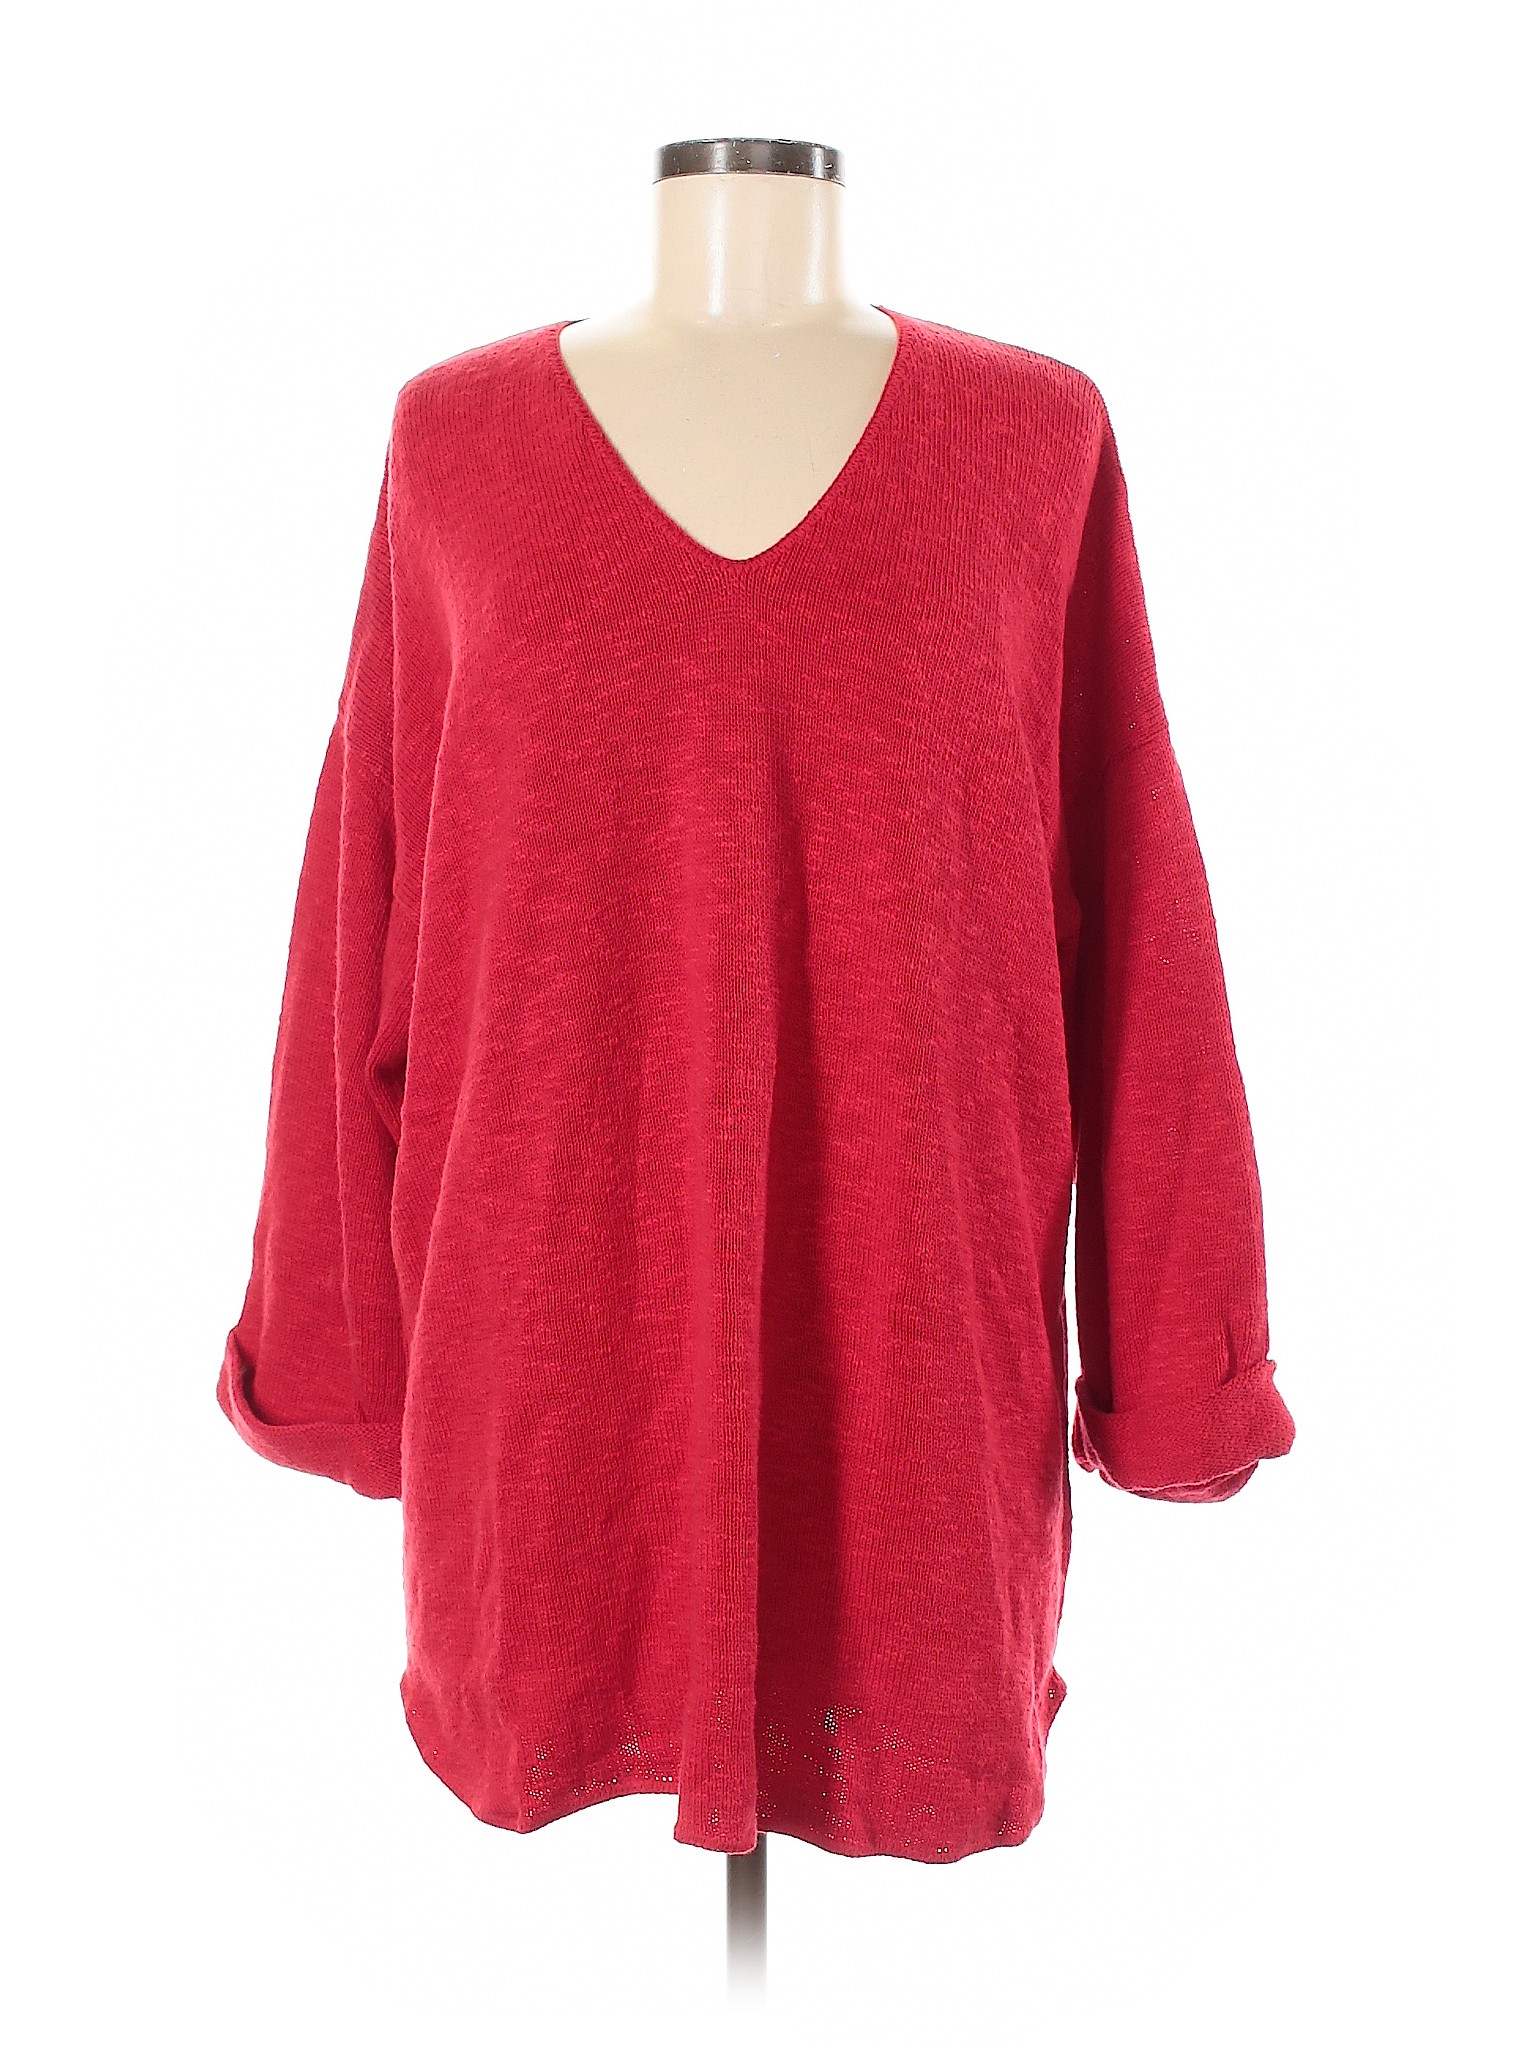 AVALIN Women Red Pullover Sweater One Size | eBay